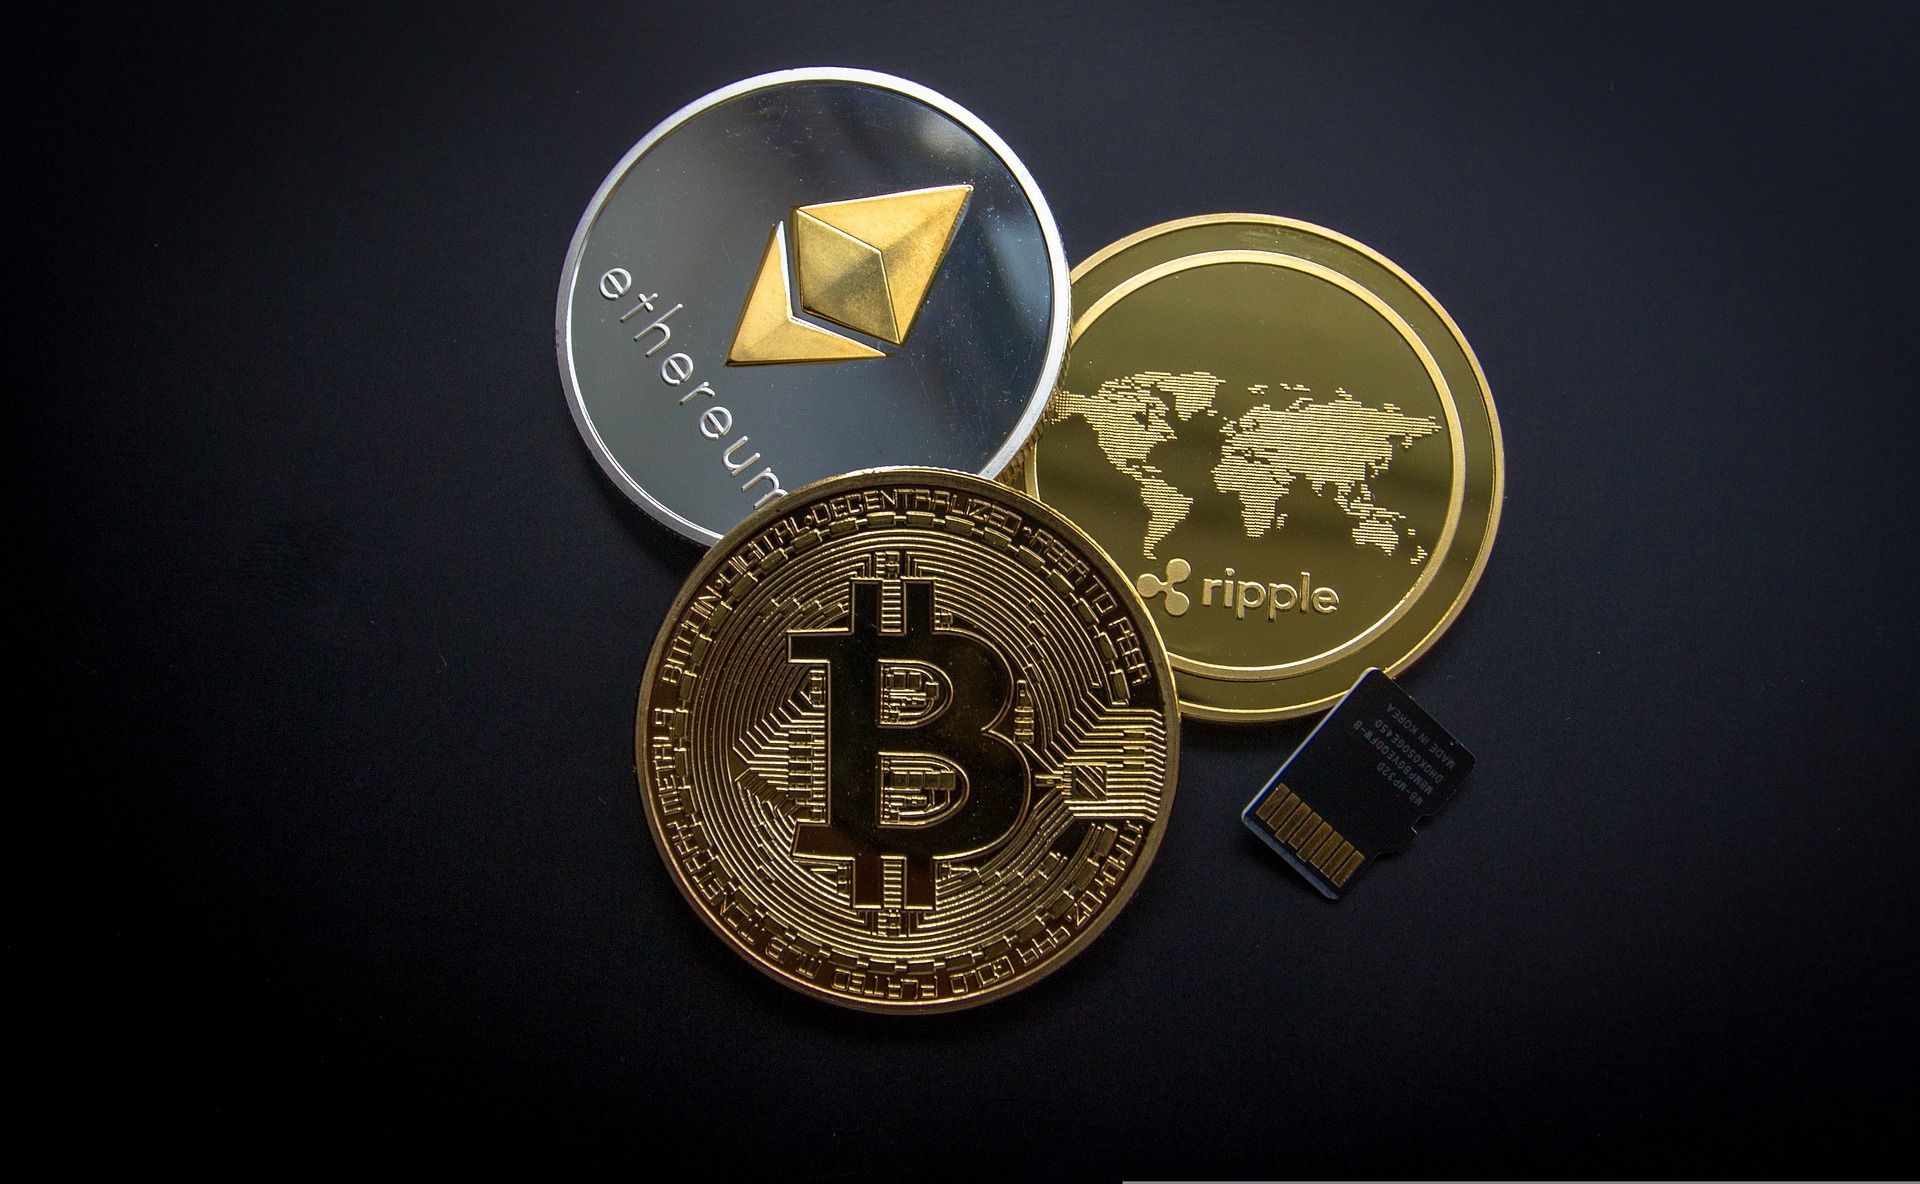 Top 5 cryptocurrencies of the day: Bitcoin down, Santos FC trends at no. 1